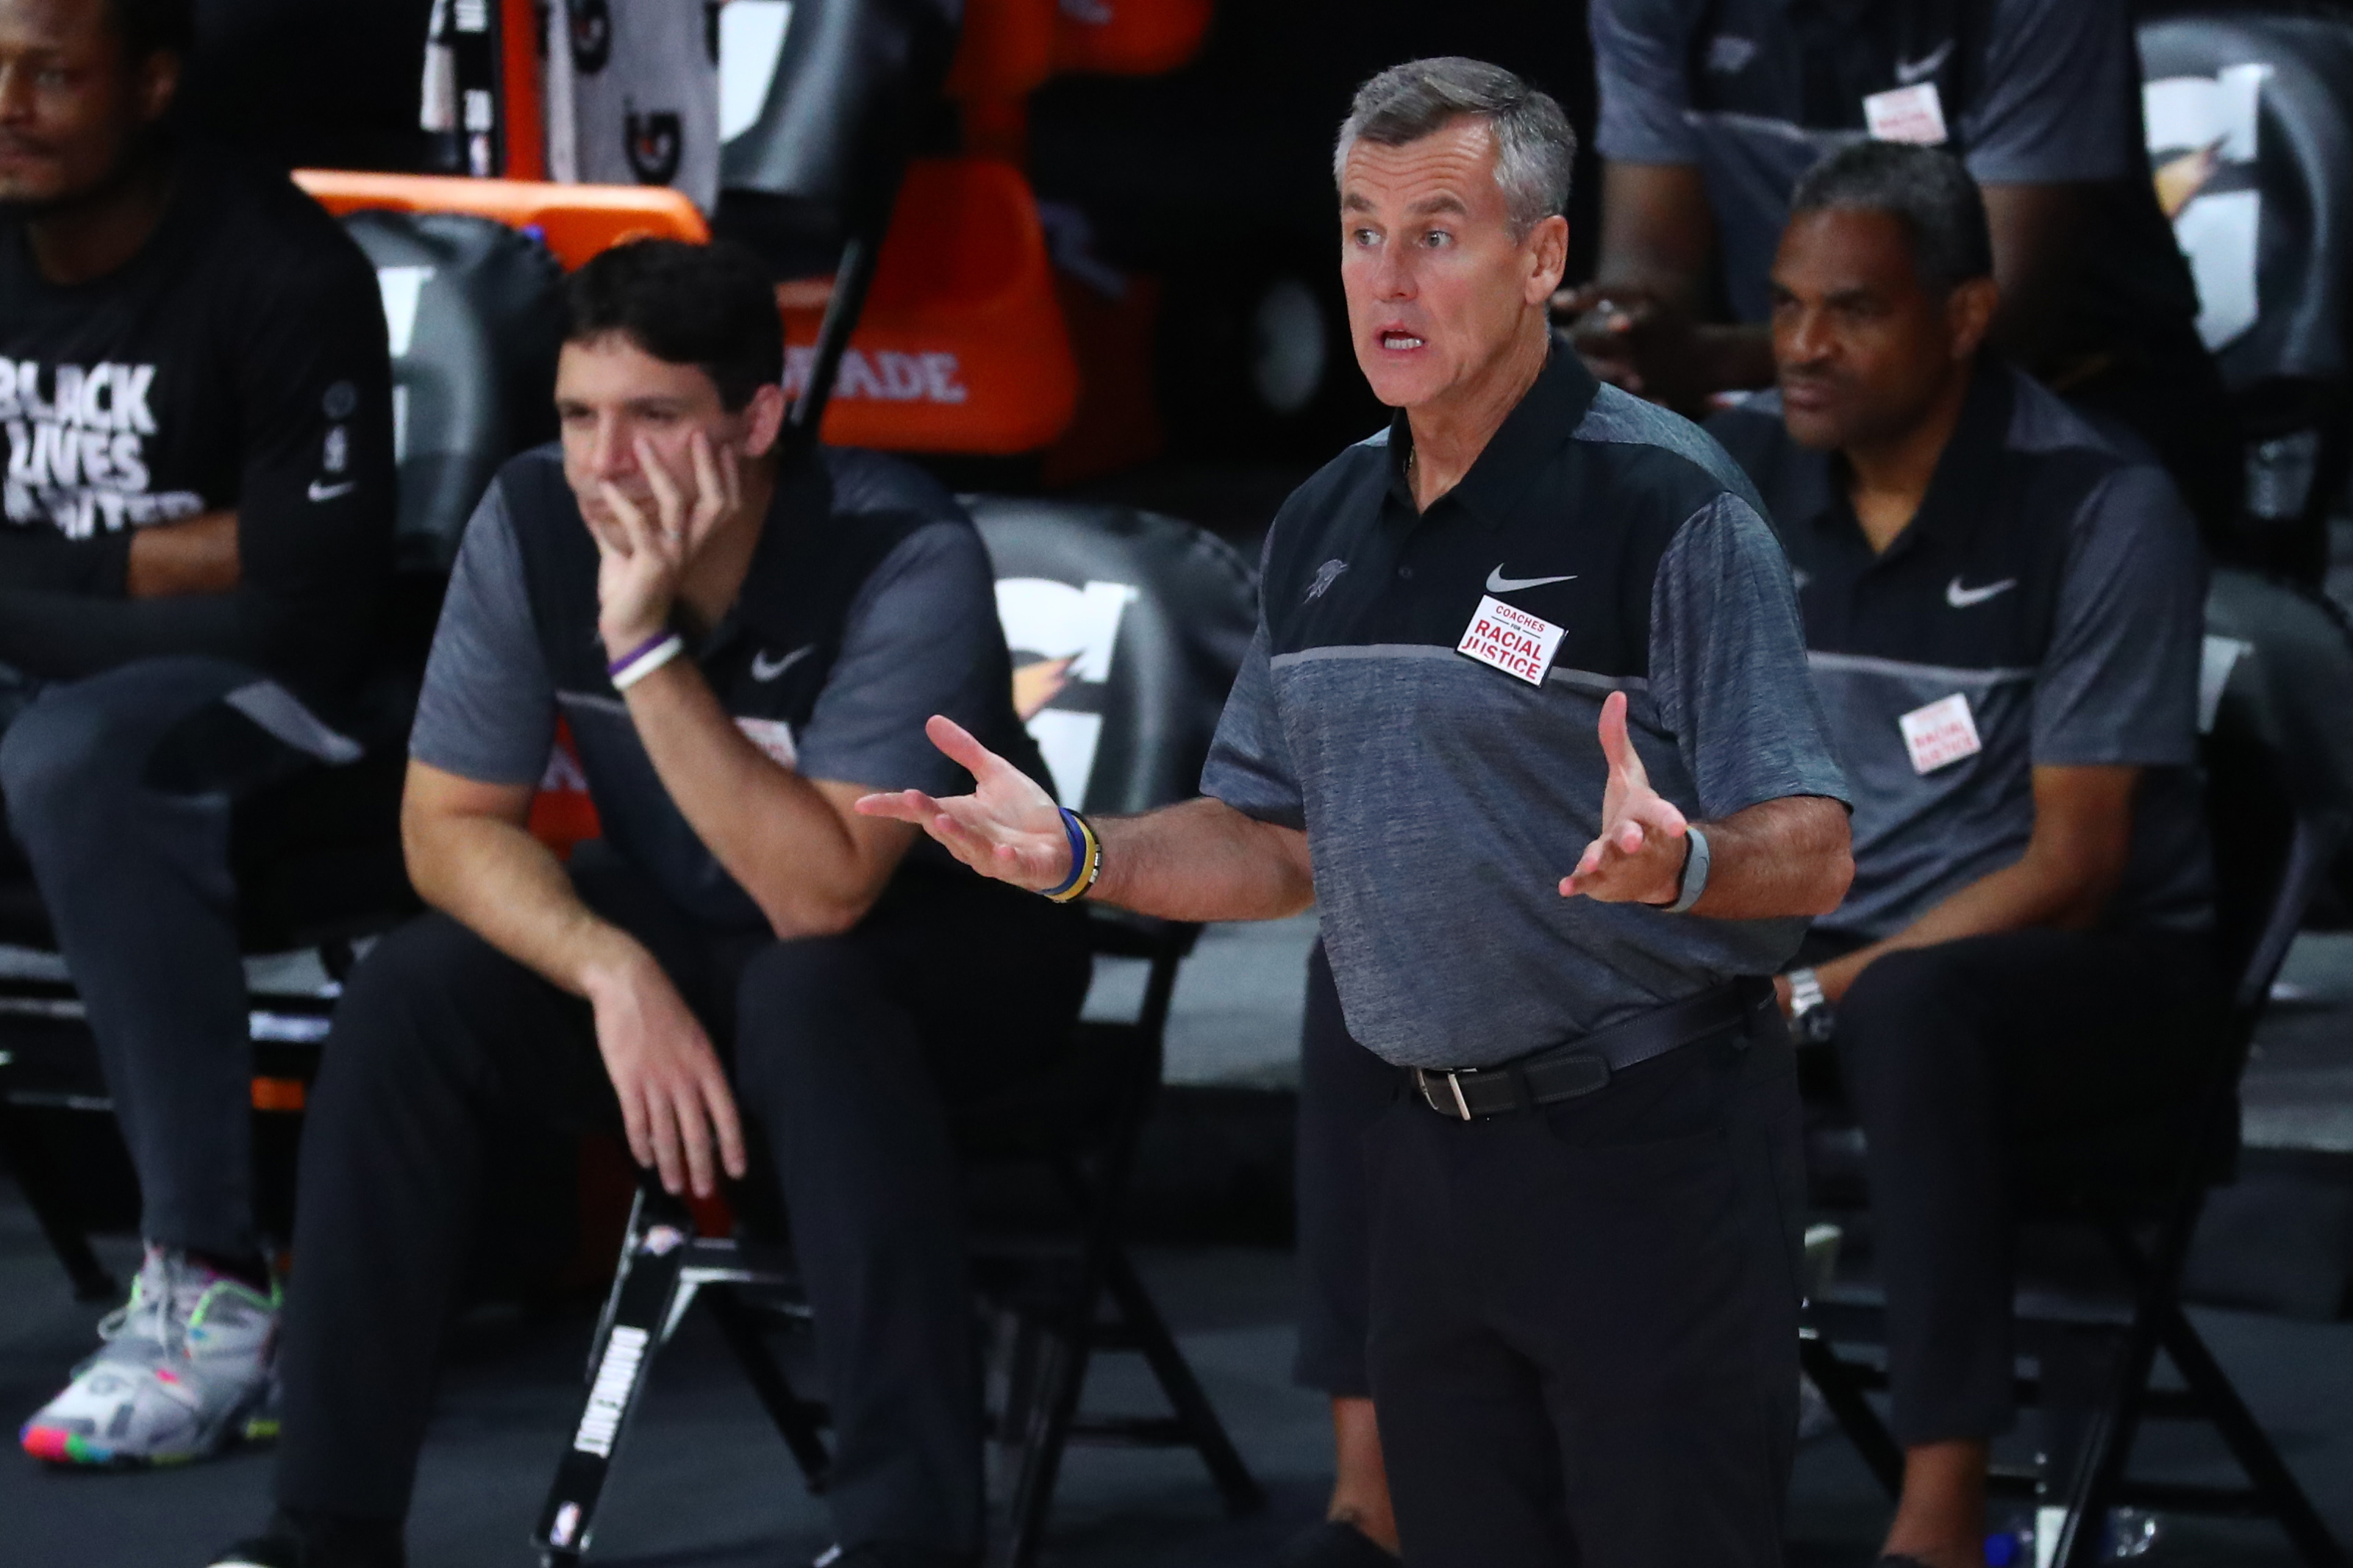 Chicago Bulls head coach Billy Donovan signed a contract extension